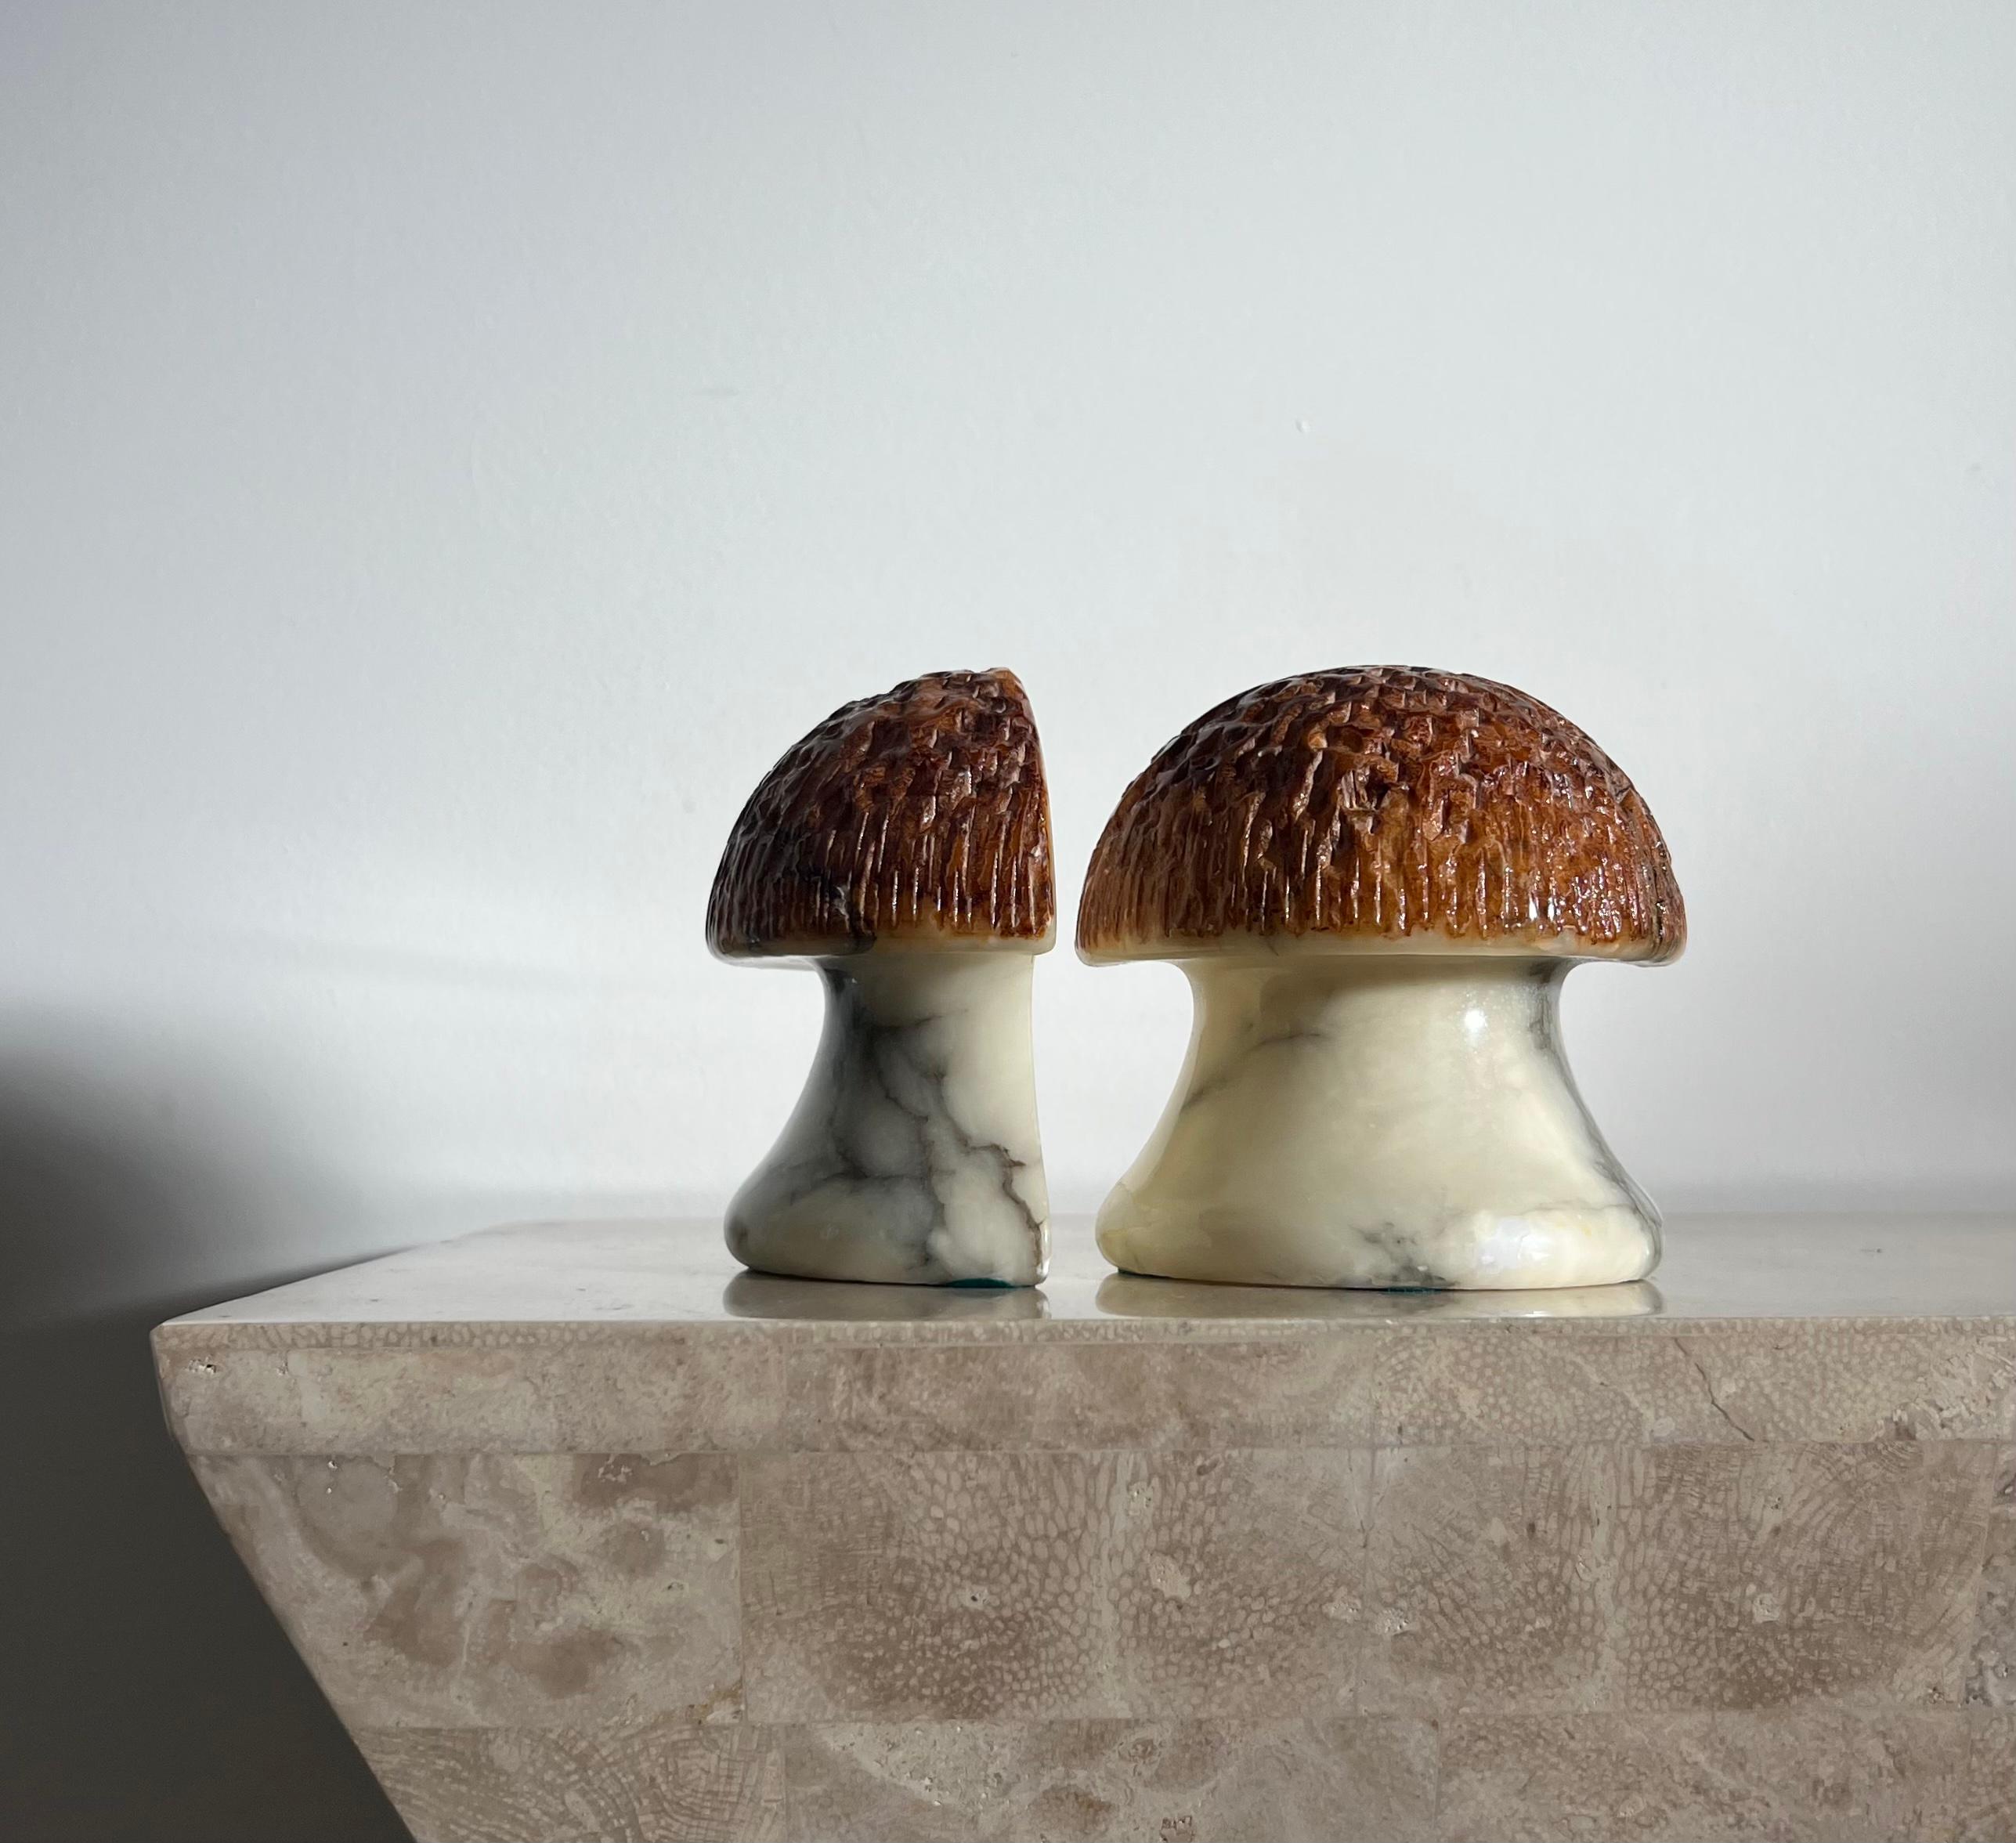 A pair of vintage Italian marble mushroom bookends, late 1960s. Hand-carved in Italy. Bases are cream colored with ash veining, while caps are a rich toffee hue and are textured. A wonderful gift for any fan of the psychedelic or any lover of the